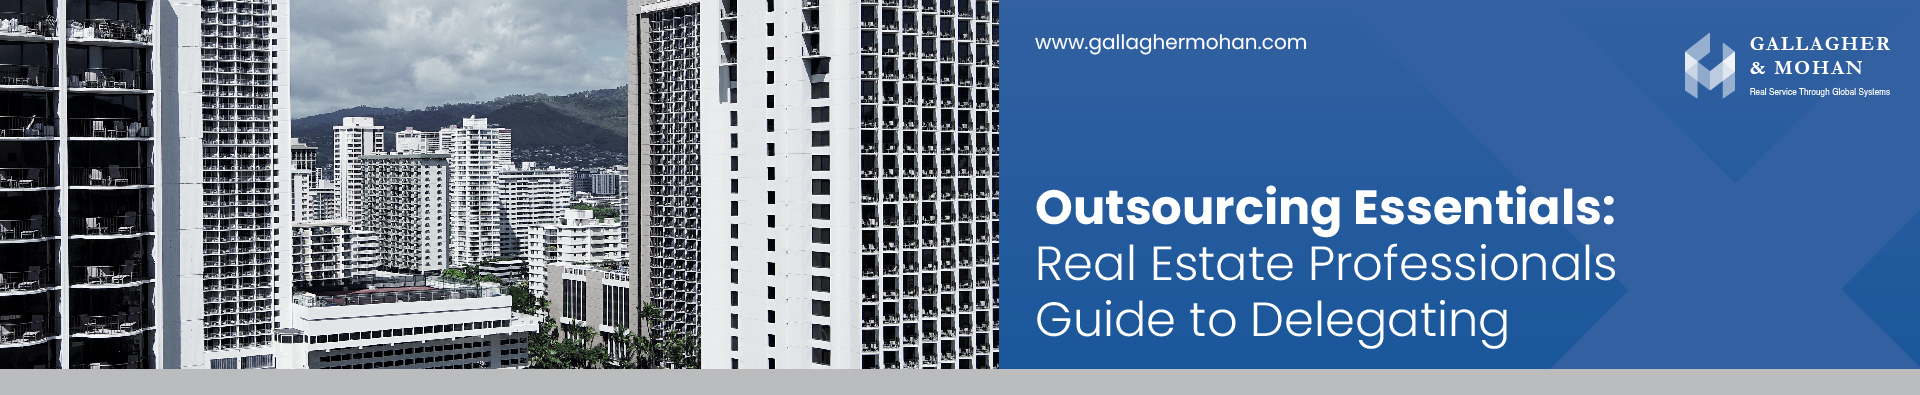 Outsourcing Essentials Real Estate Professionals' Guide To Delegating